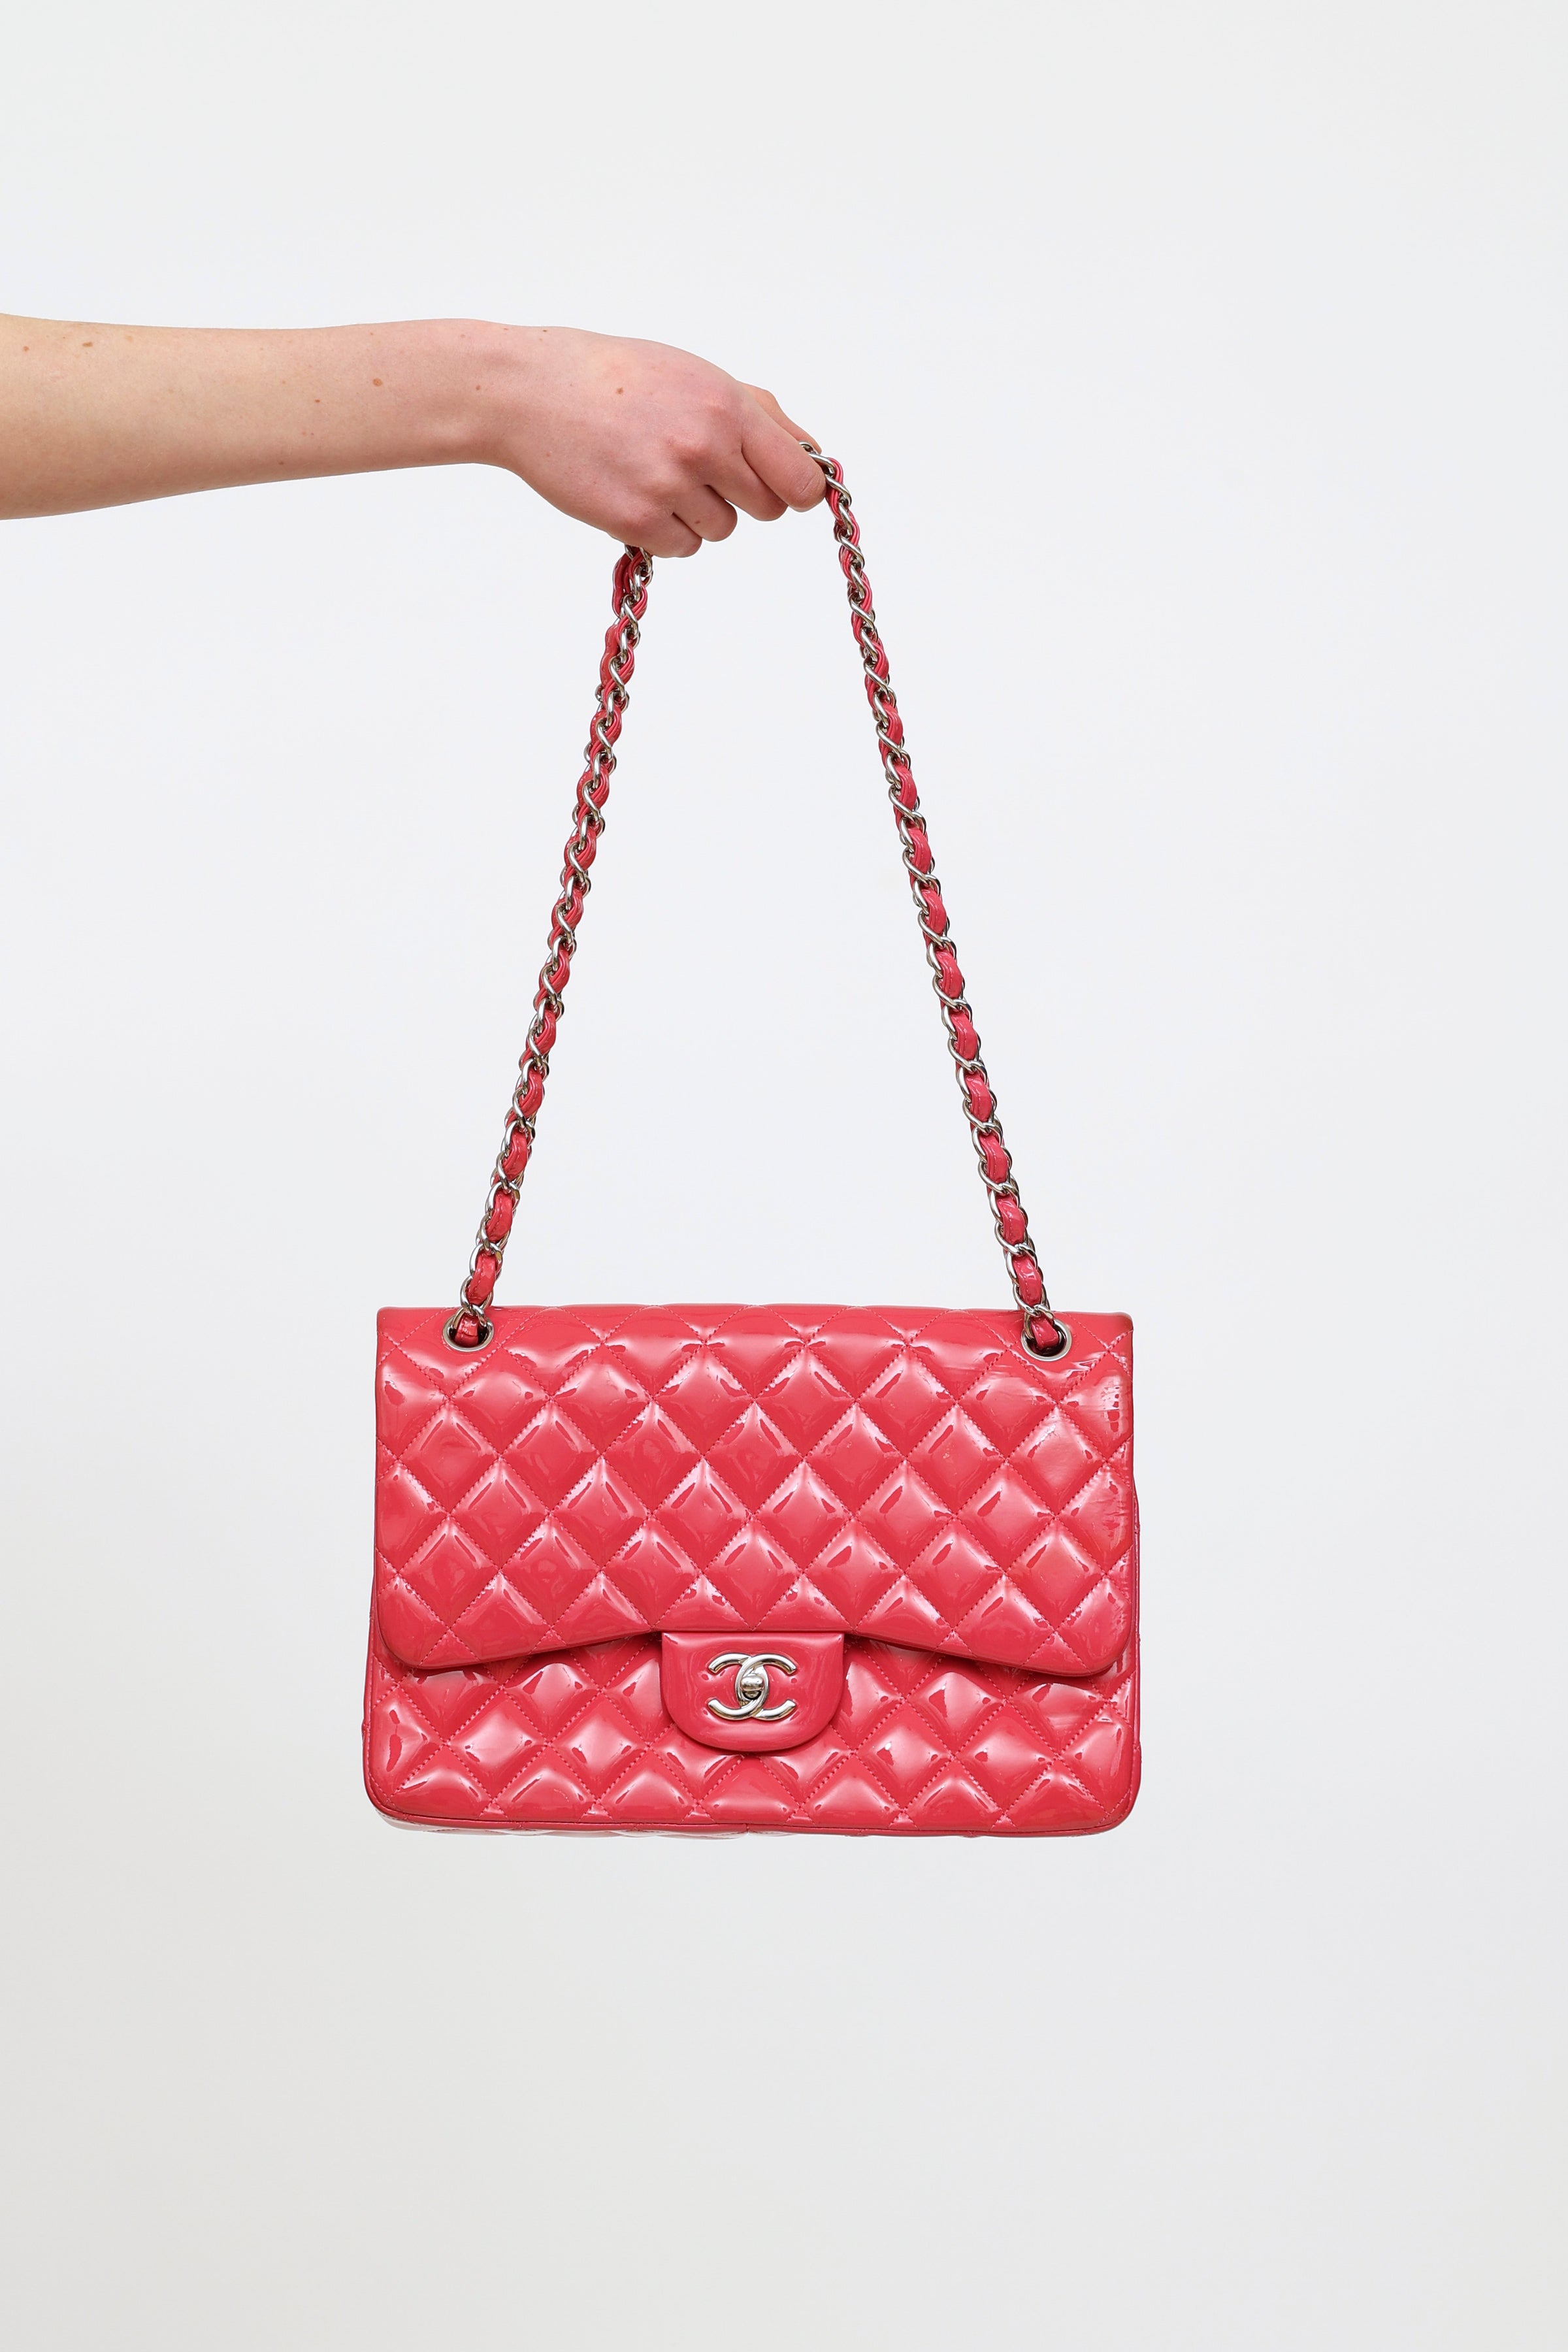 Chanel Pink Quilted Patent Leather Jumbo Double Flap Bag with